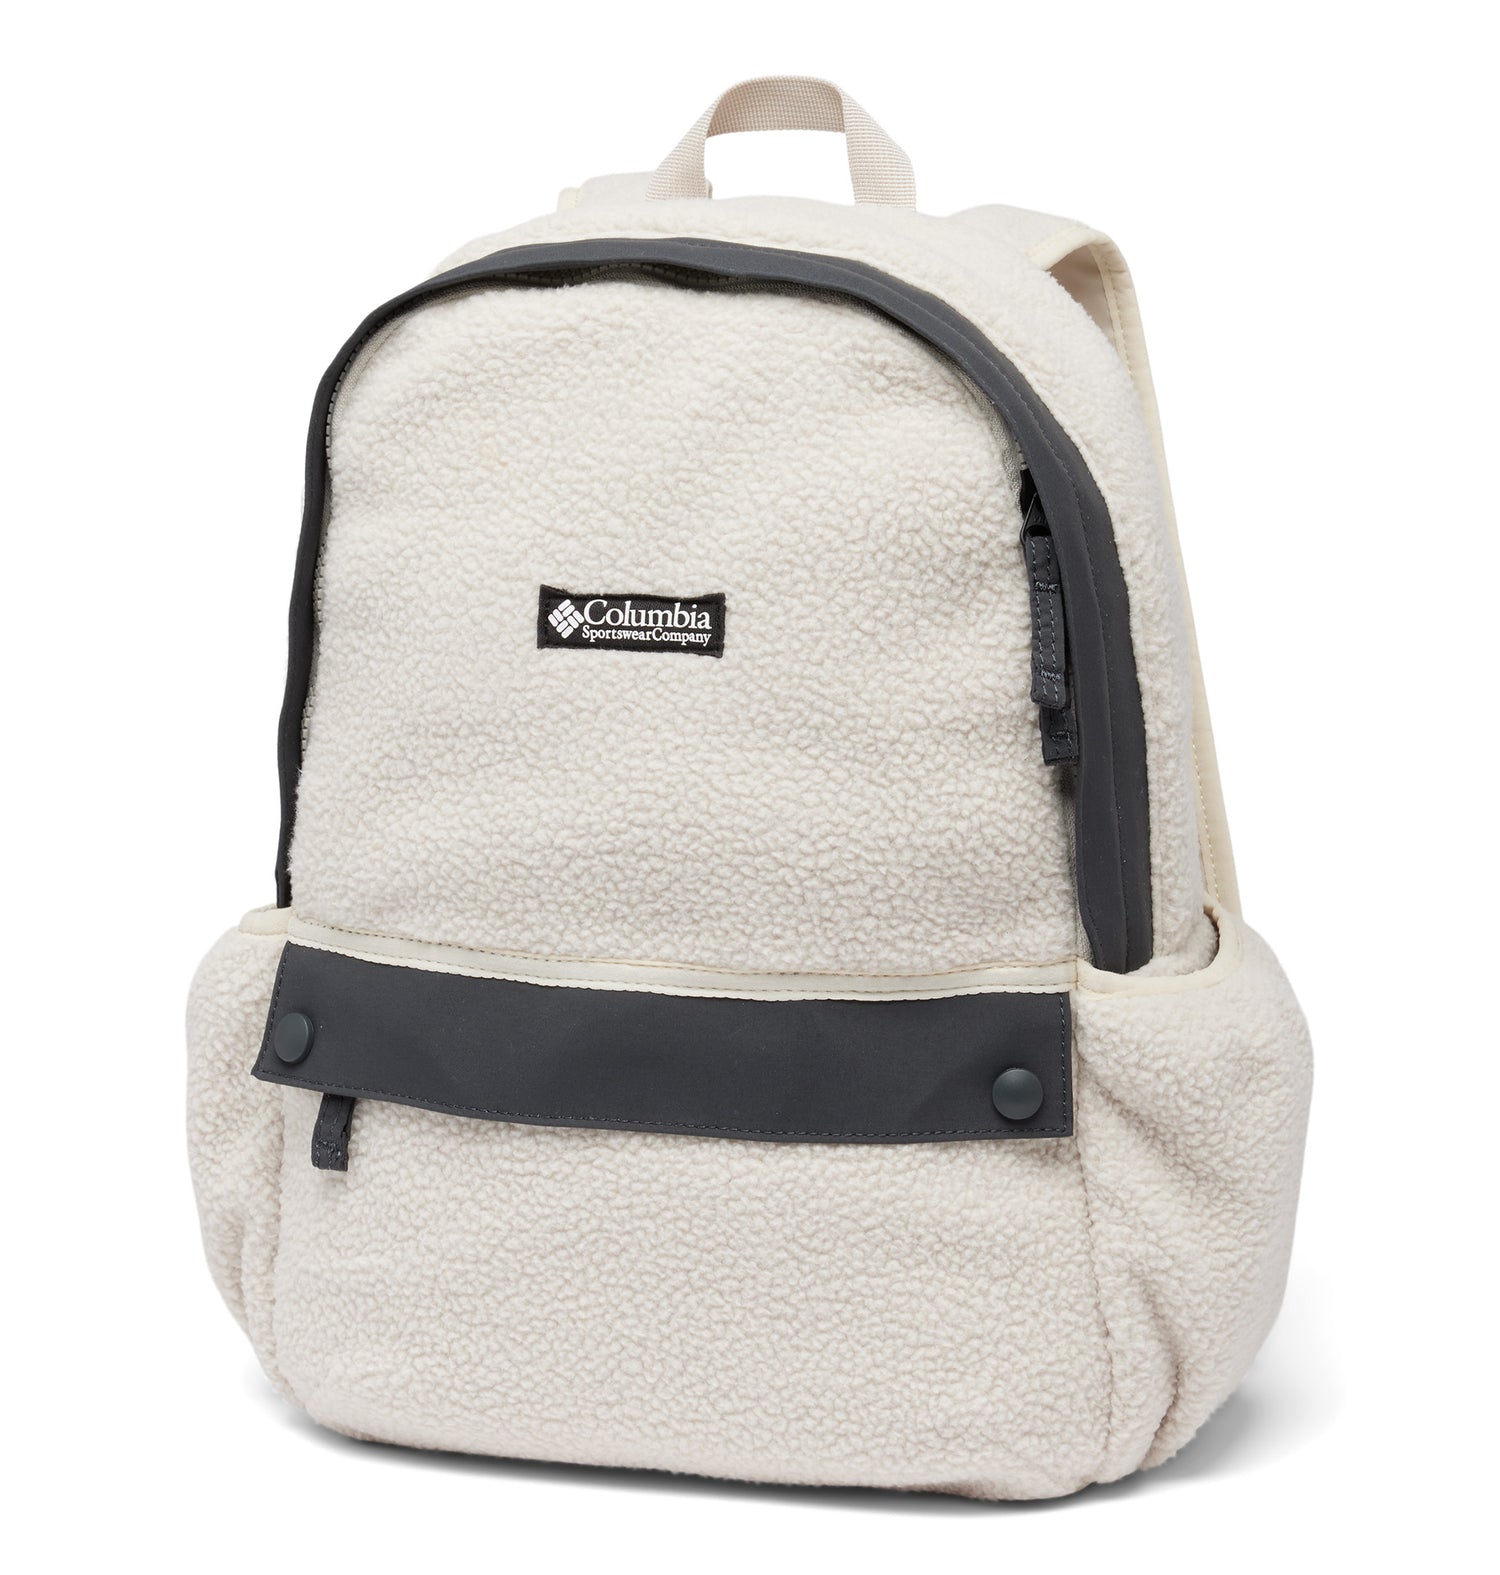 Front side of a beige backpack called Helvetia designed by Columbia showing its fleece teture, logo printed on the front compartment, and 2 snap-button opening to a front pocket.